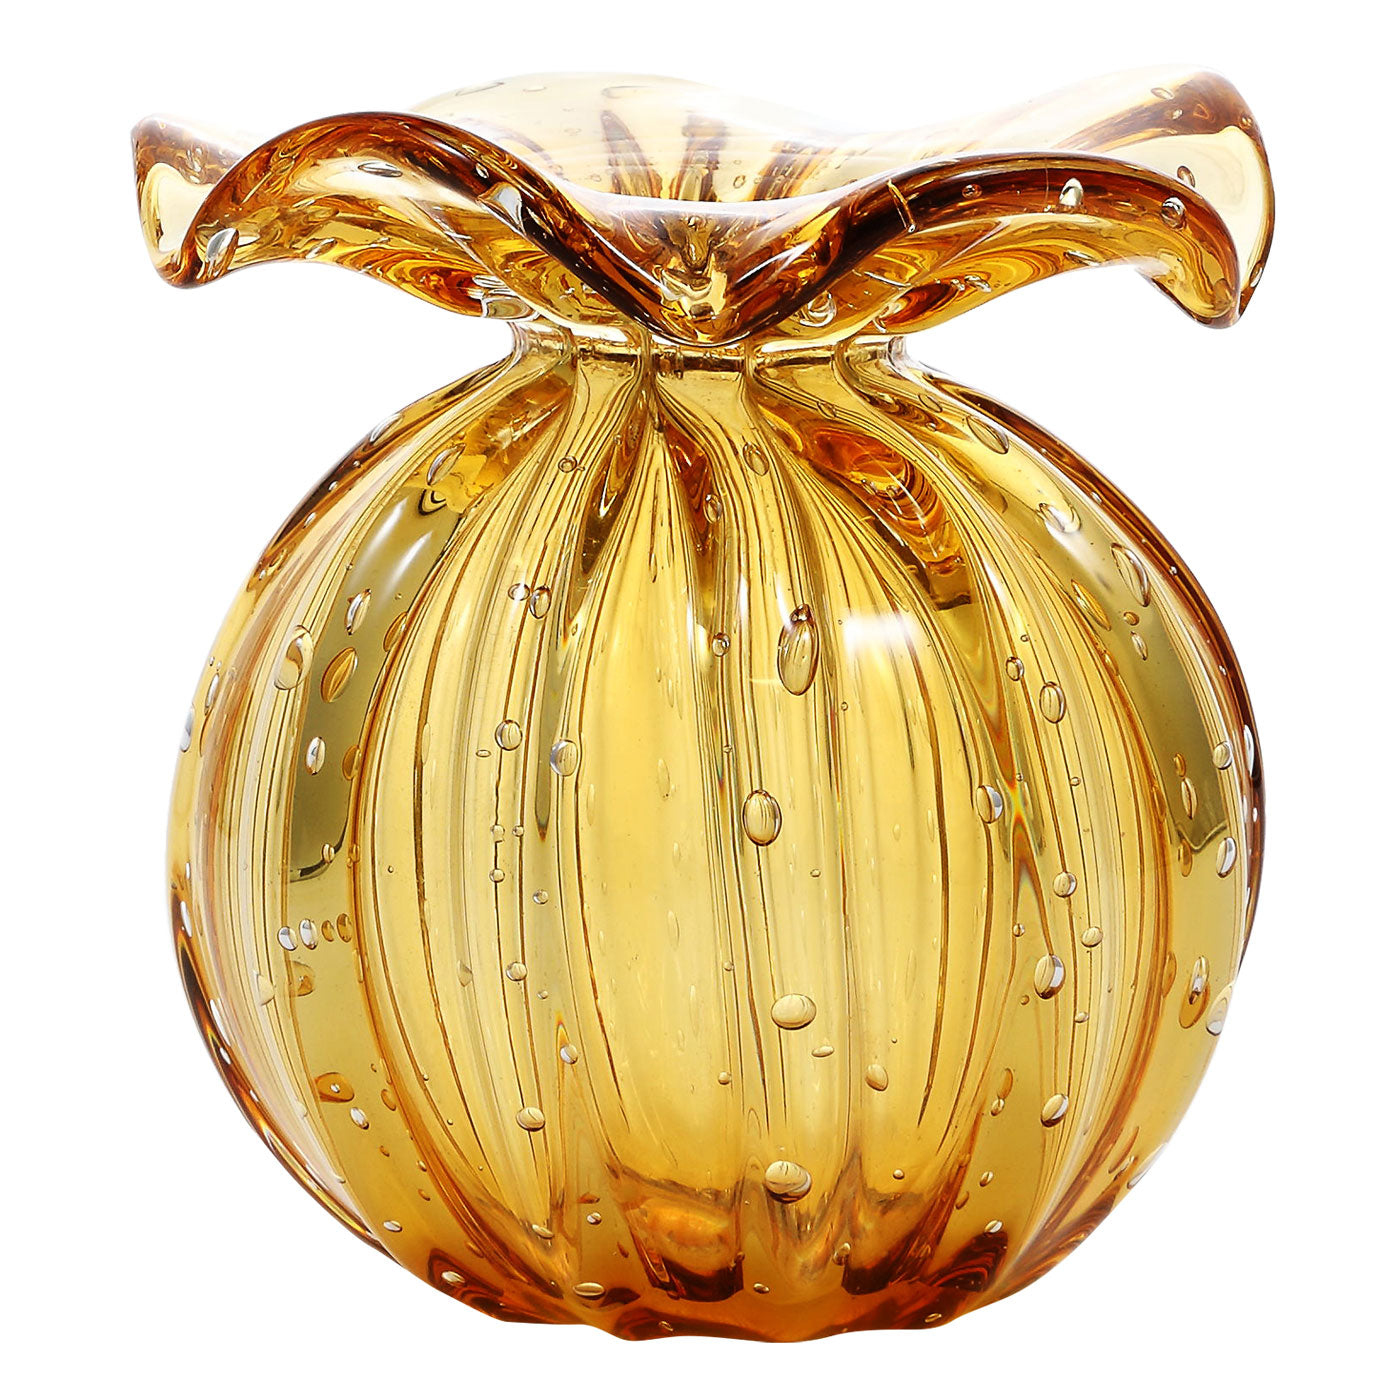 Hand Blown French Marigold Art Glass Vase 5.5-7.5 inch tall